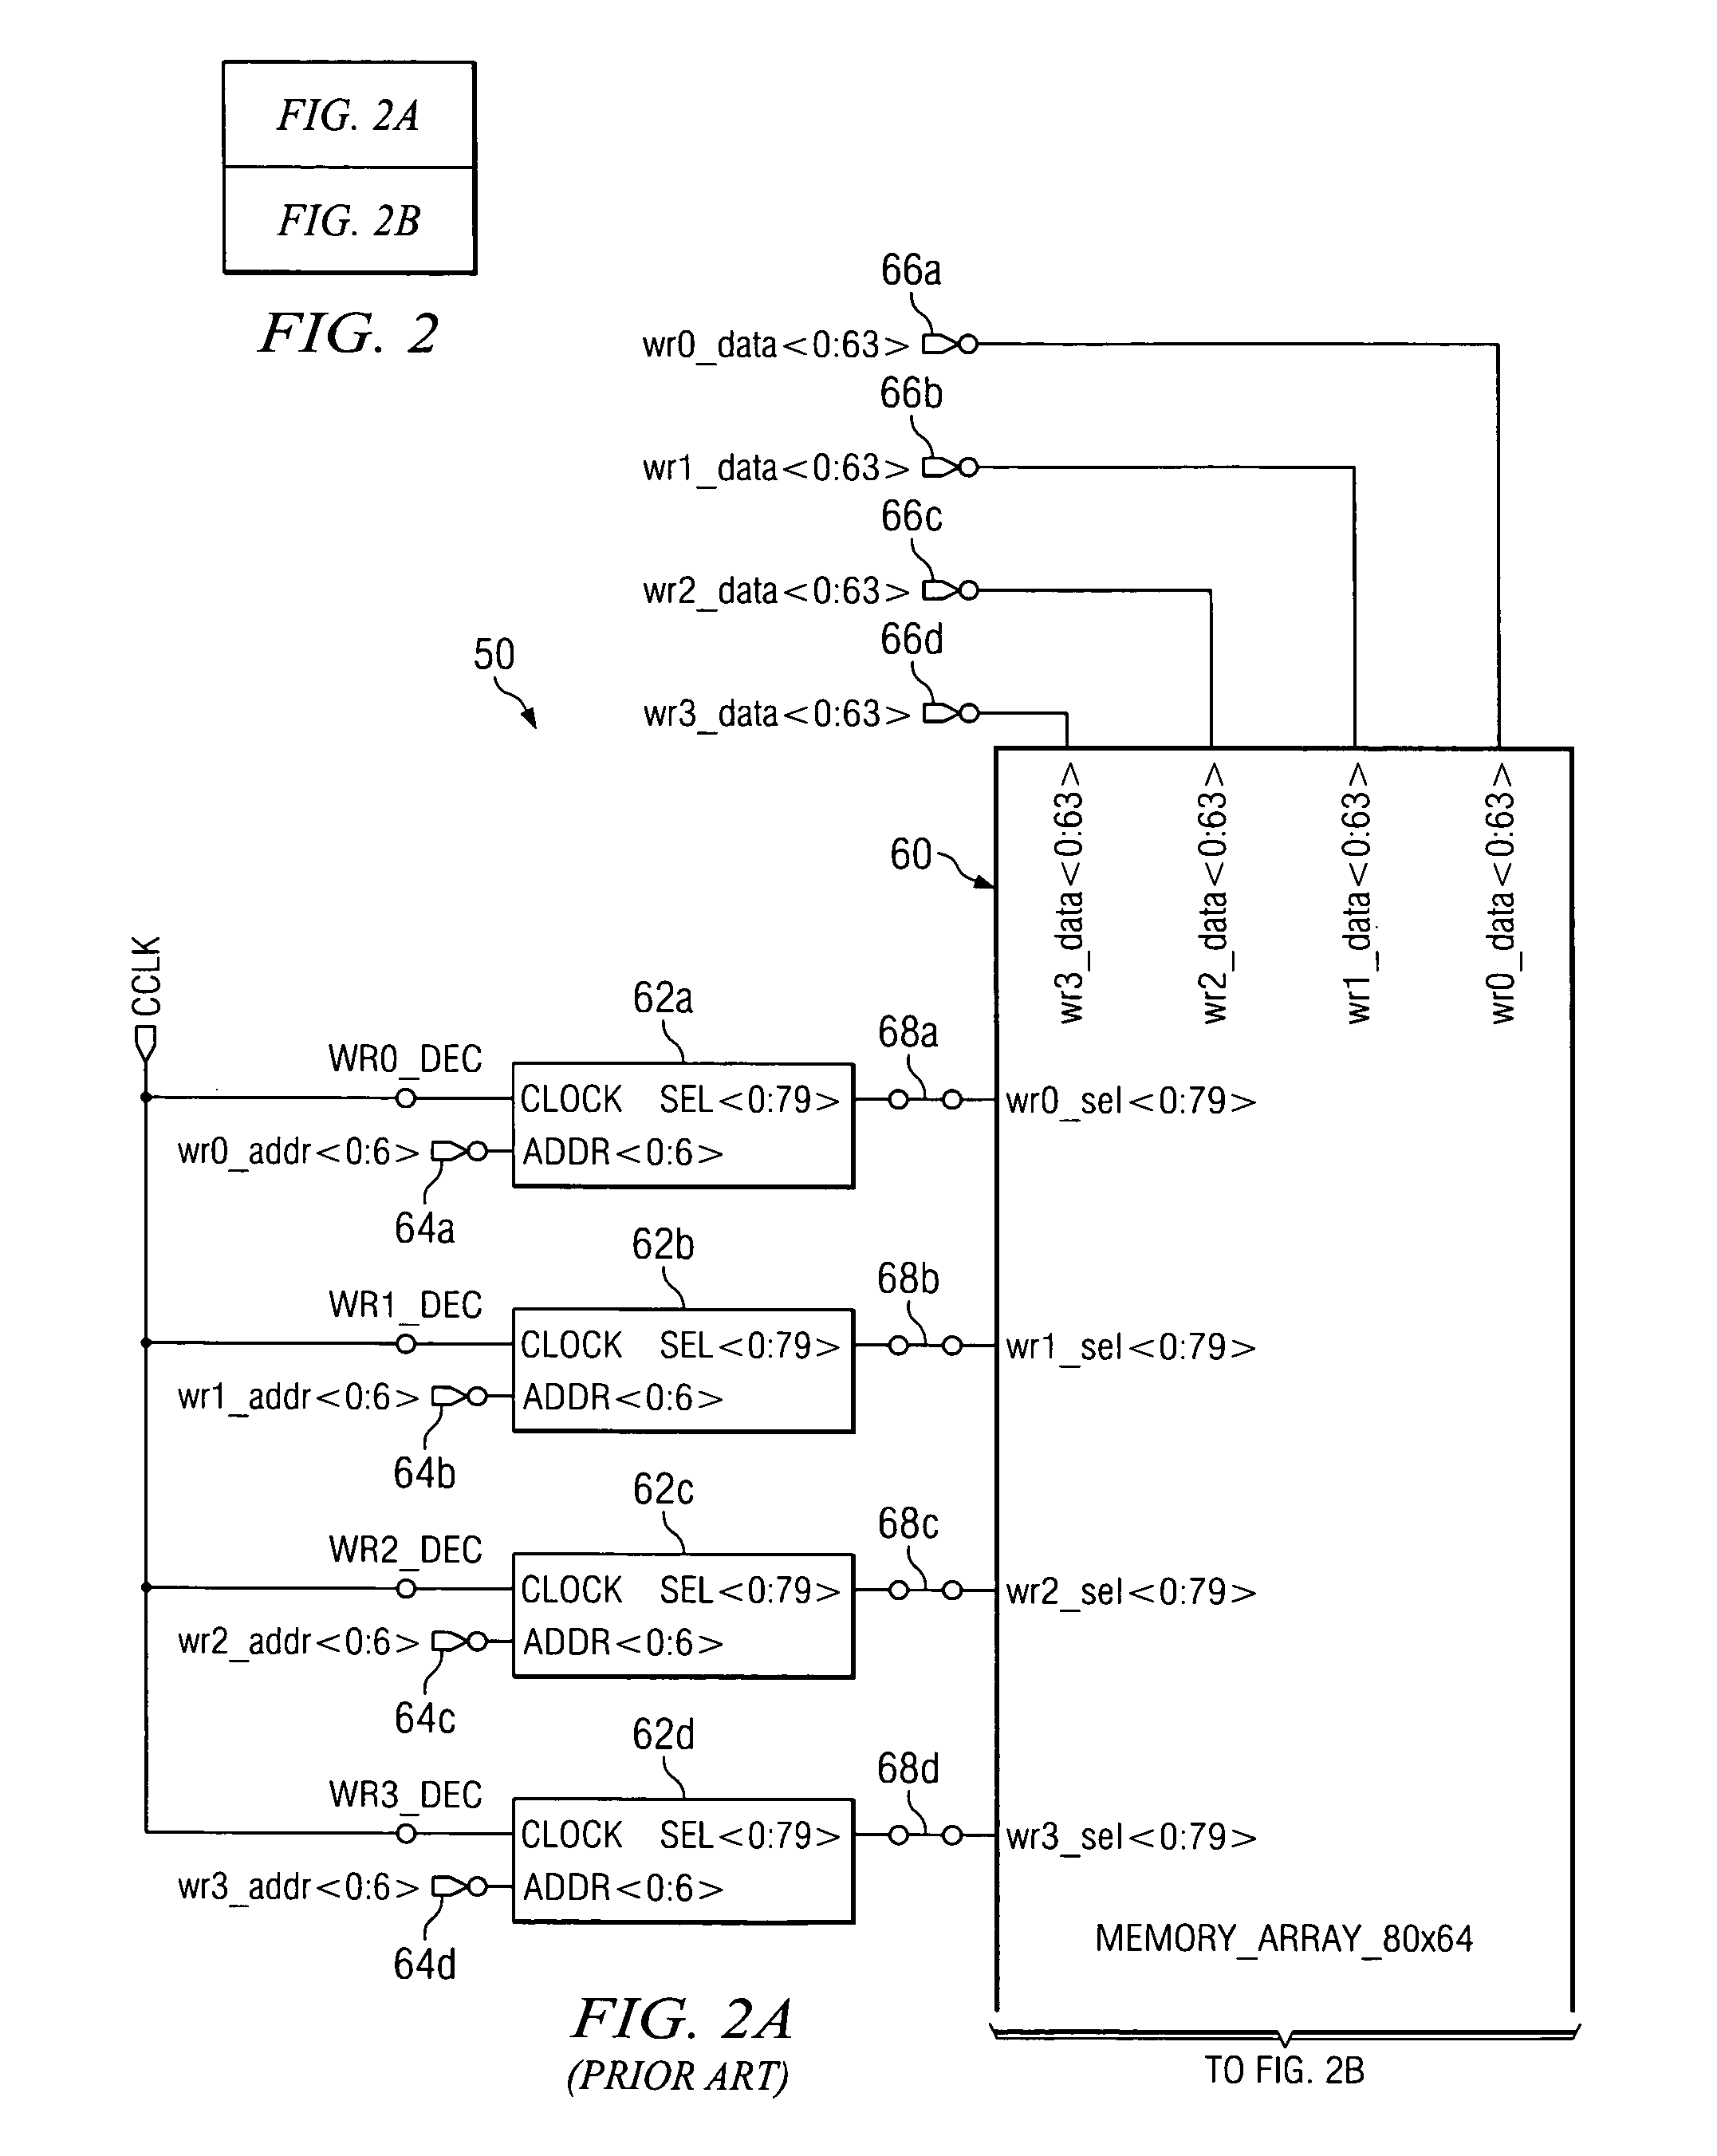 Apparatus and method for dependency tracking and register file bypass controls using a scannable register file